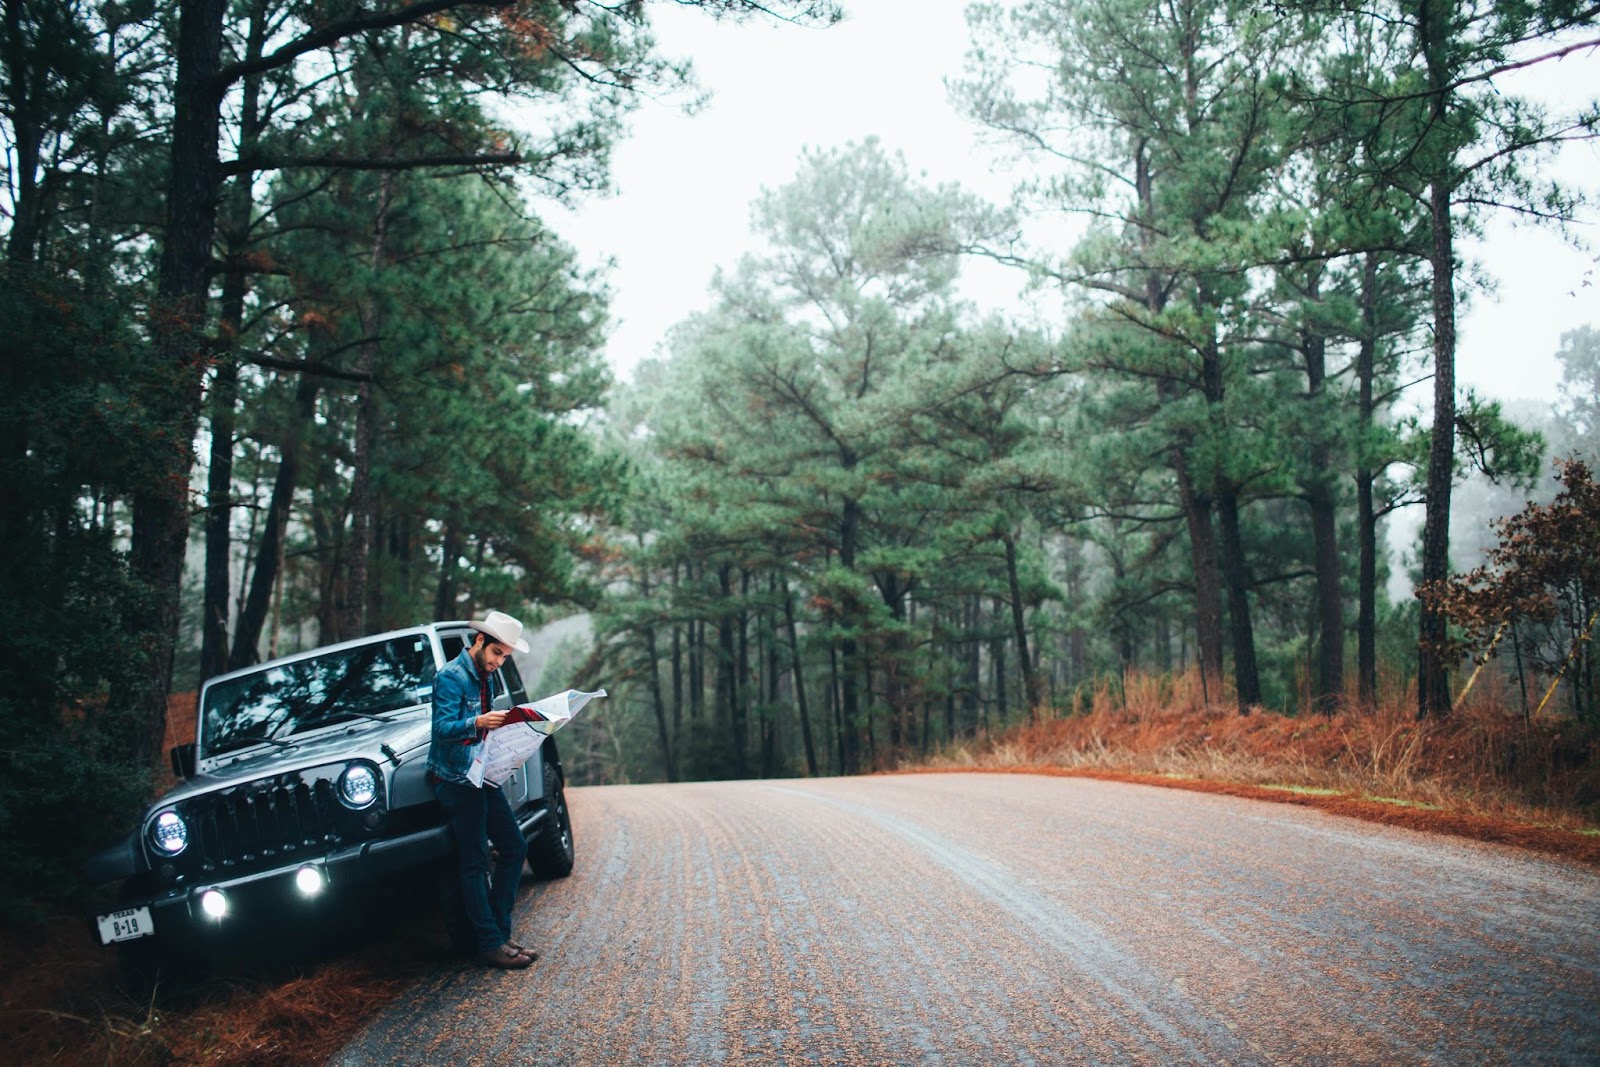 How To Plan An Unforgettable Road Trip